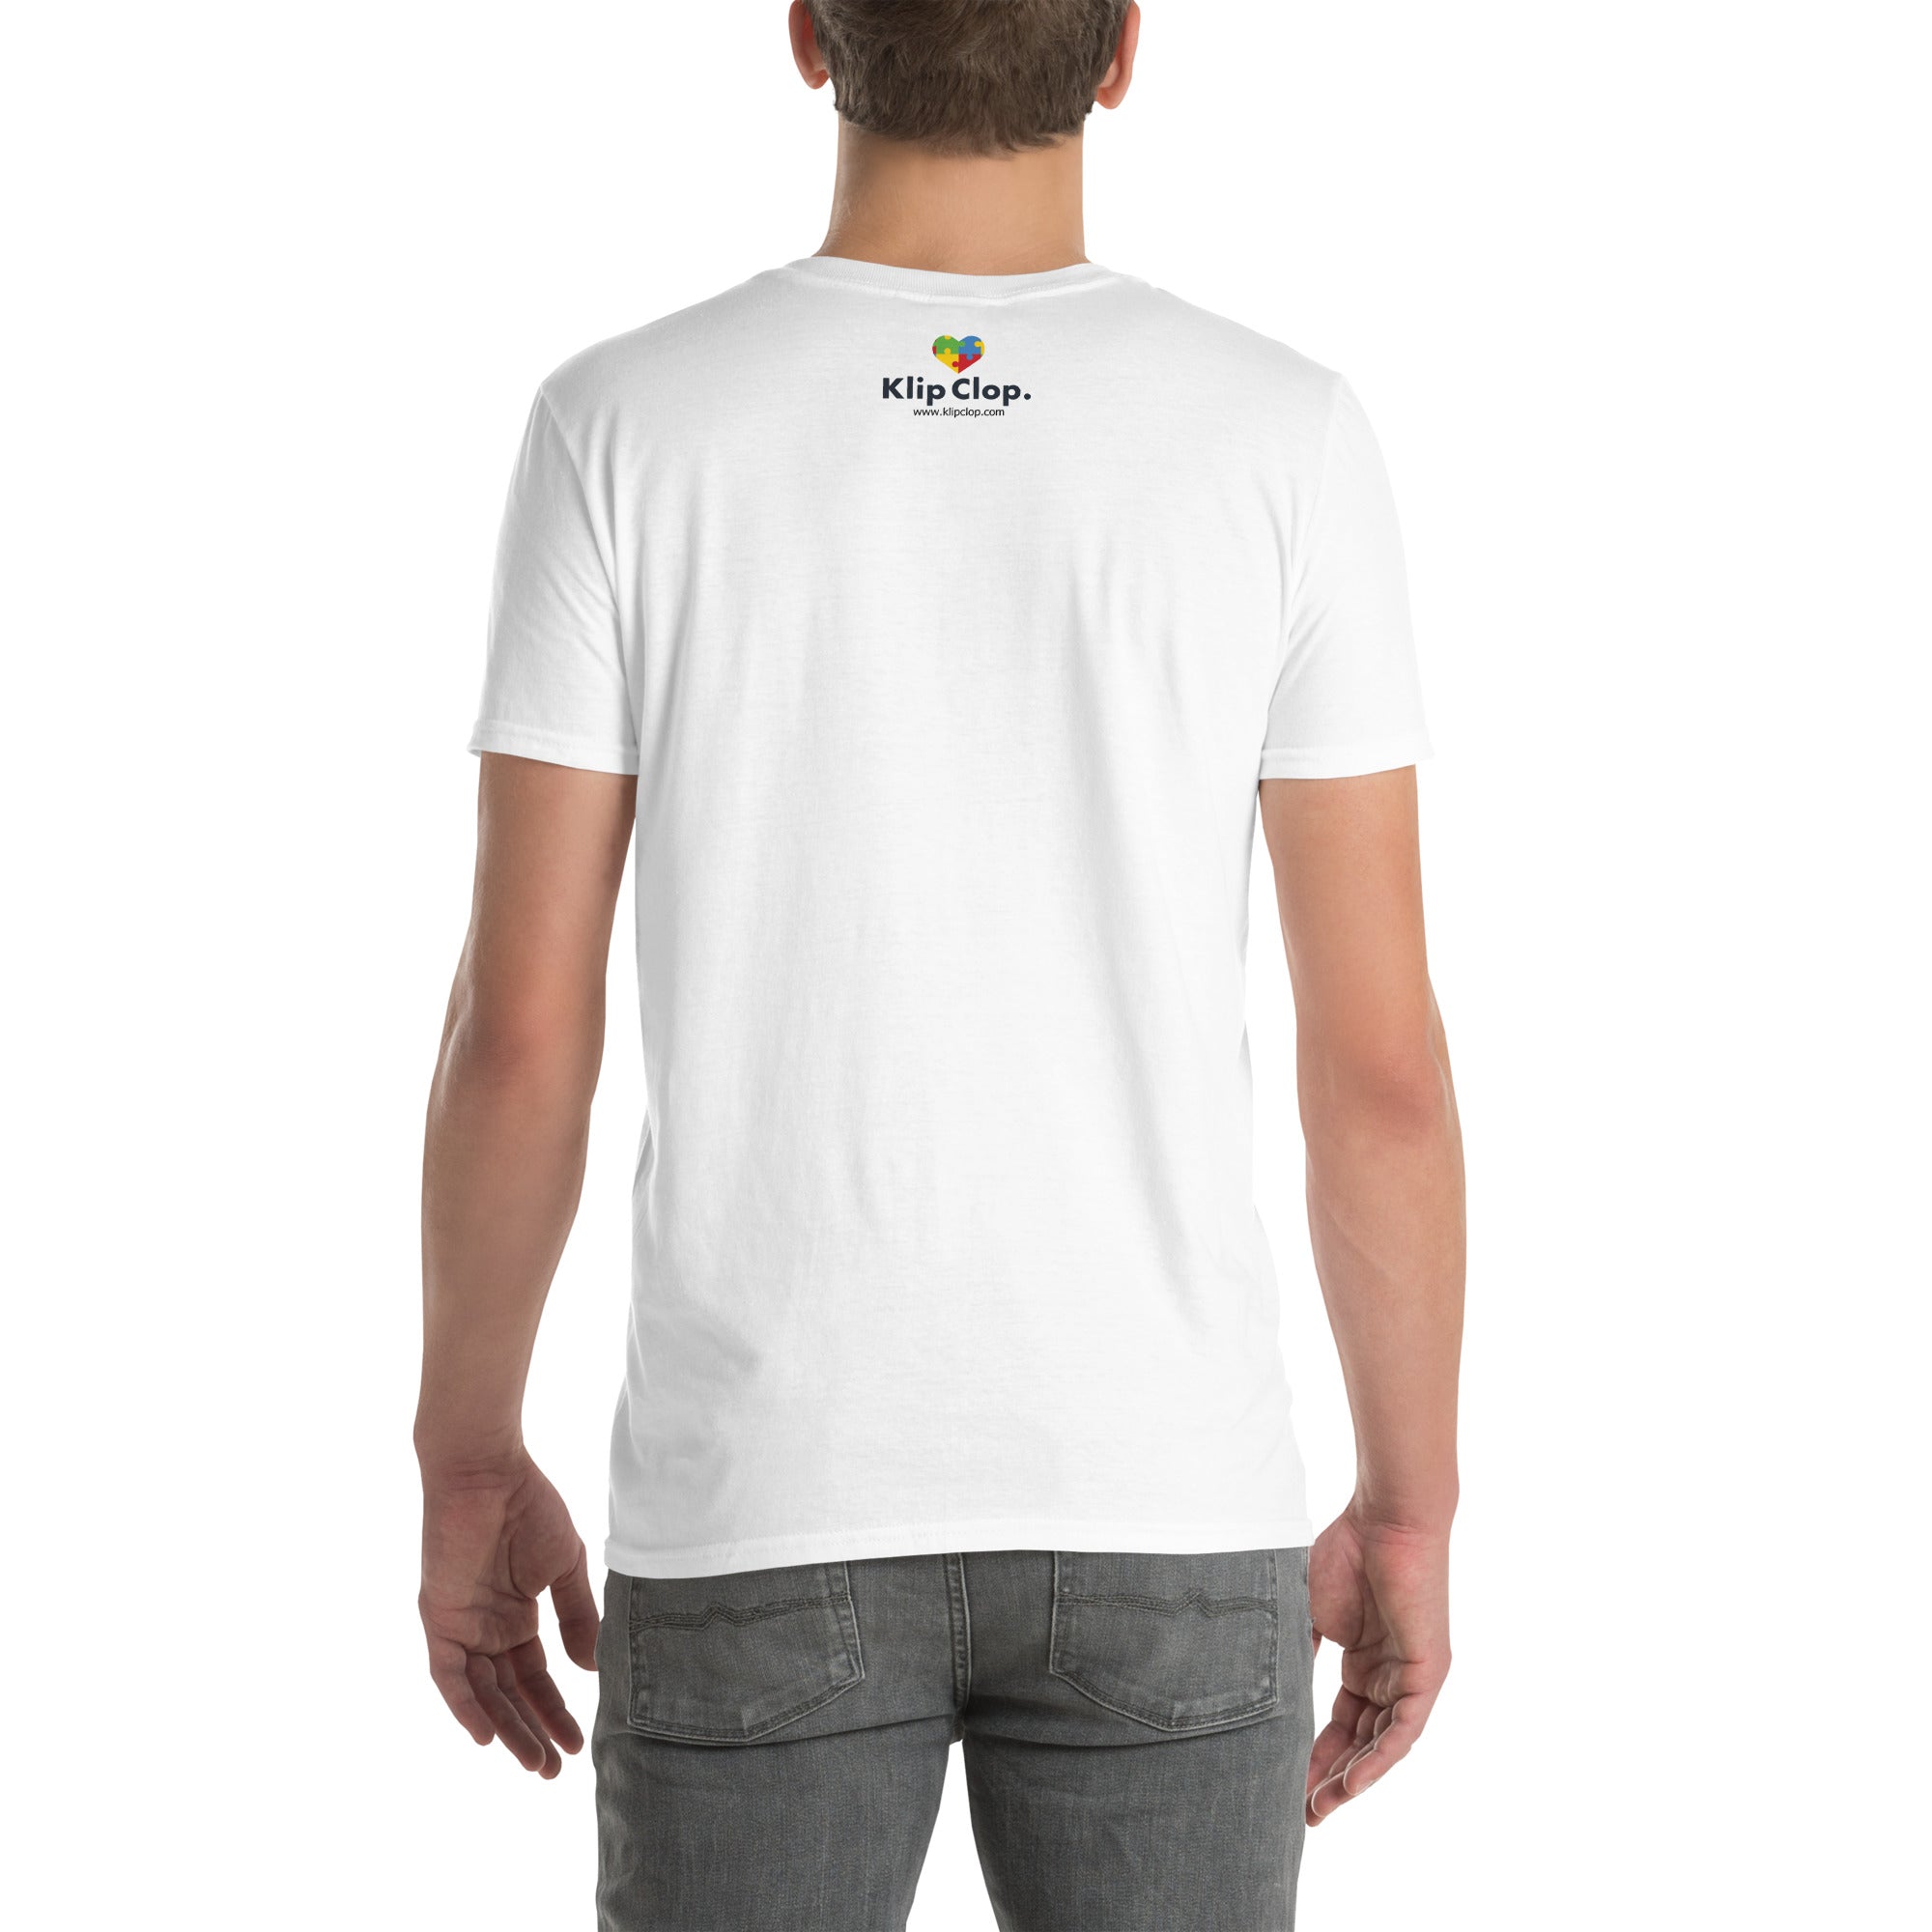 Short-Sleeve Unisex T-Shirt- Autism doesn t with a manual